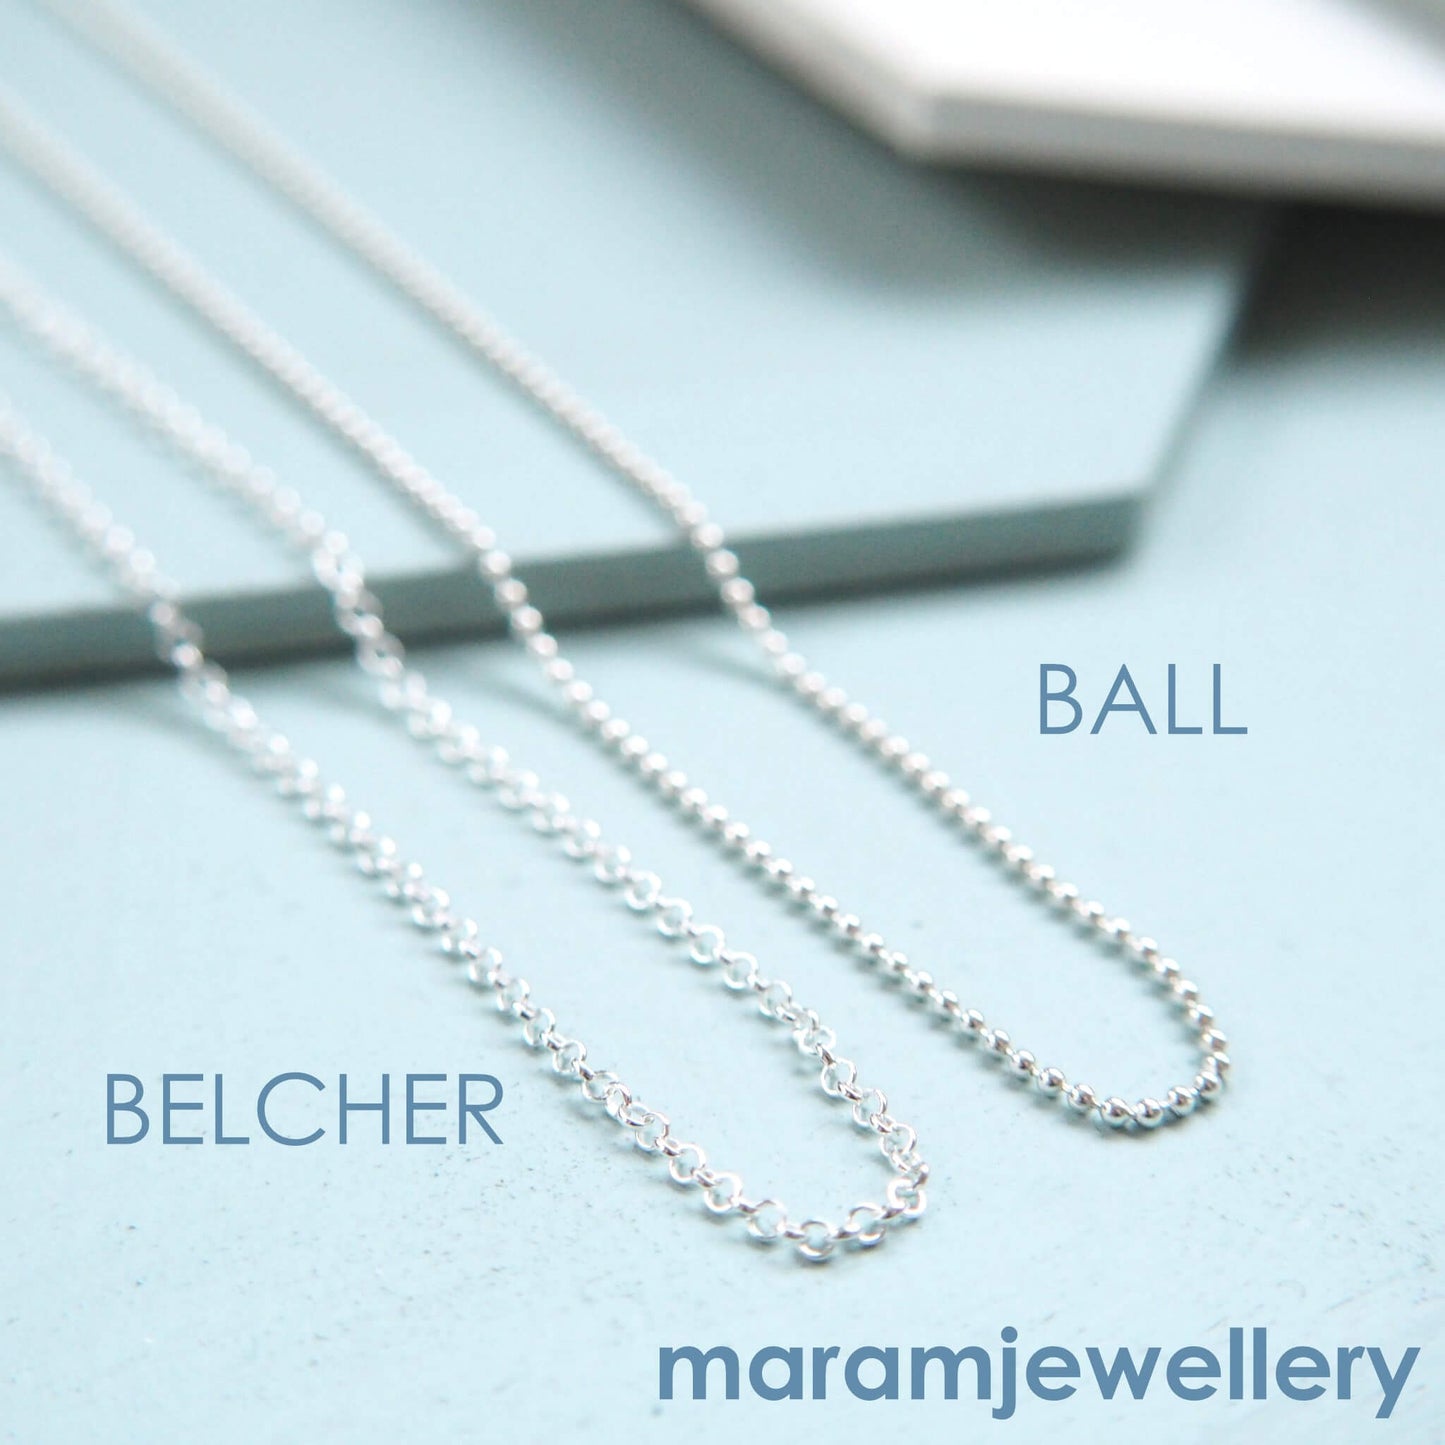 Chains available for maram jewellery pendants pictured on a duck blue background. THe chains are a simple ball chain and a narrow belcher/rolo chain. Available on necklaces made by maram jewellery in Scotland UK